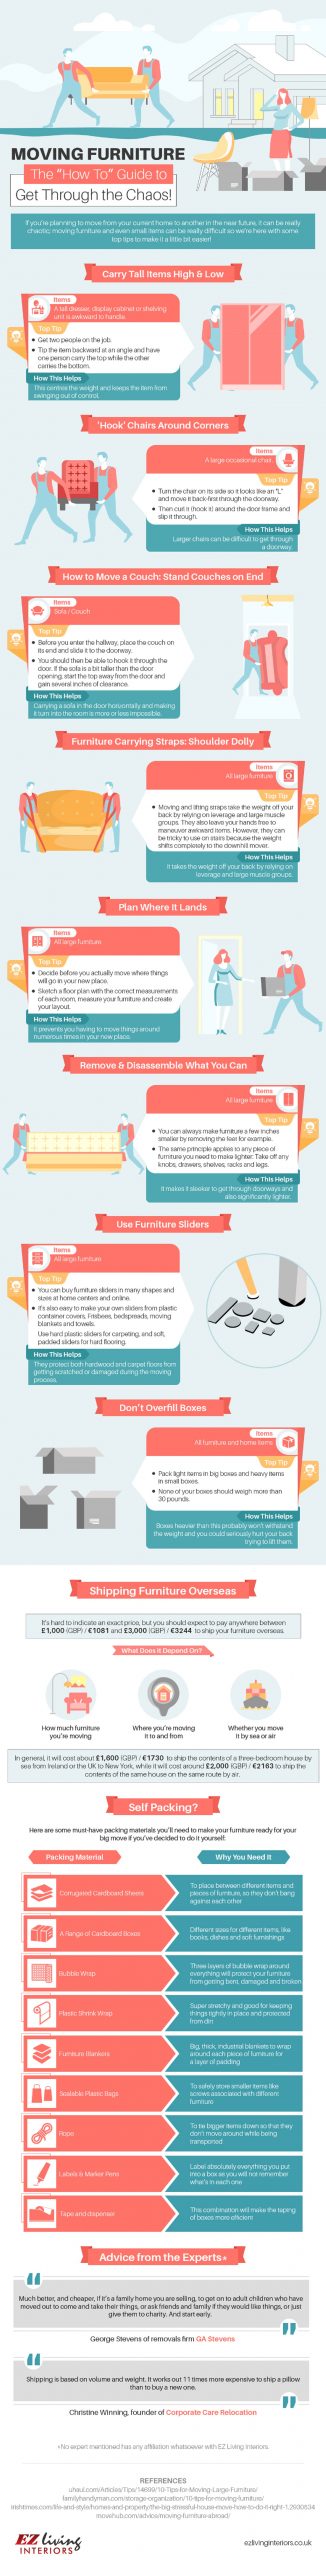 infographic about moving furniture